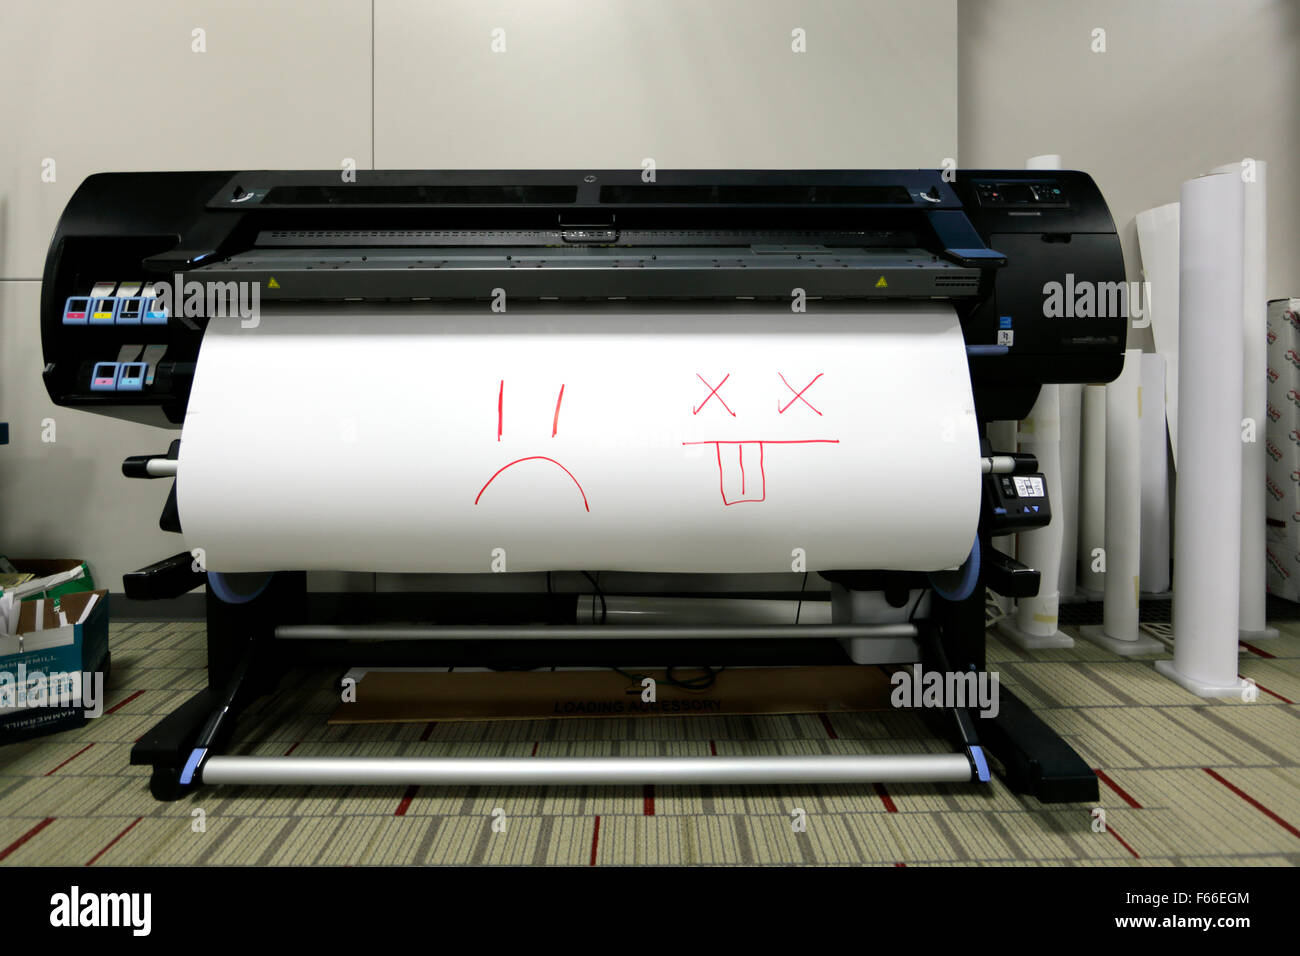 HP L26500 wide-format plotter printer with frowning faces on paper. Stock Photo